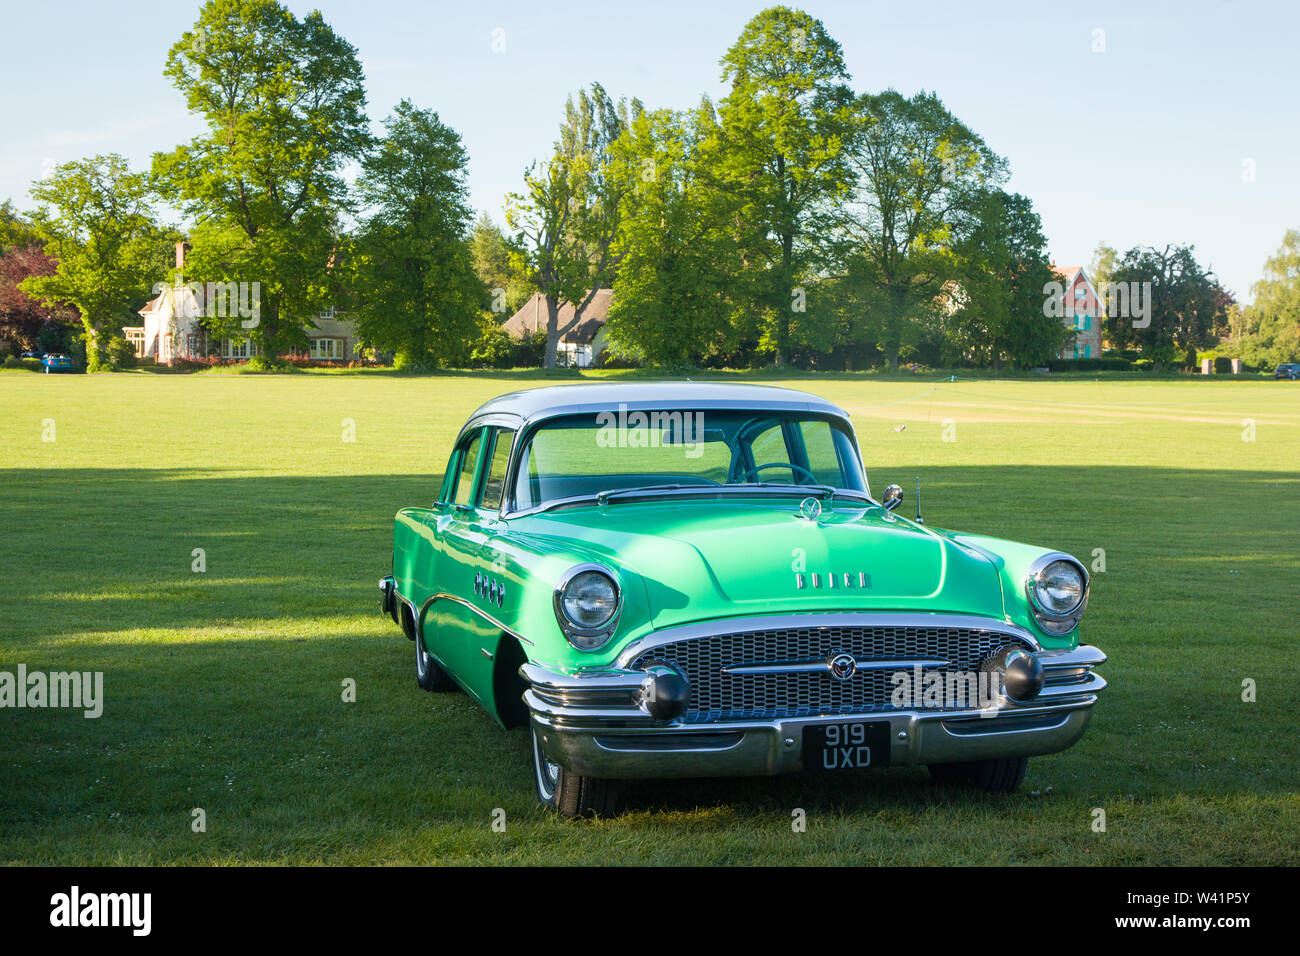 A classic fifties American 1955 Buick Roadmaster 2 Door Sedan car on the Green at Warborough, Oxfordshire Stock Photo